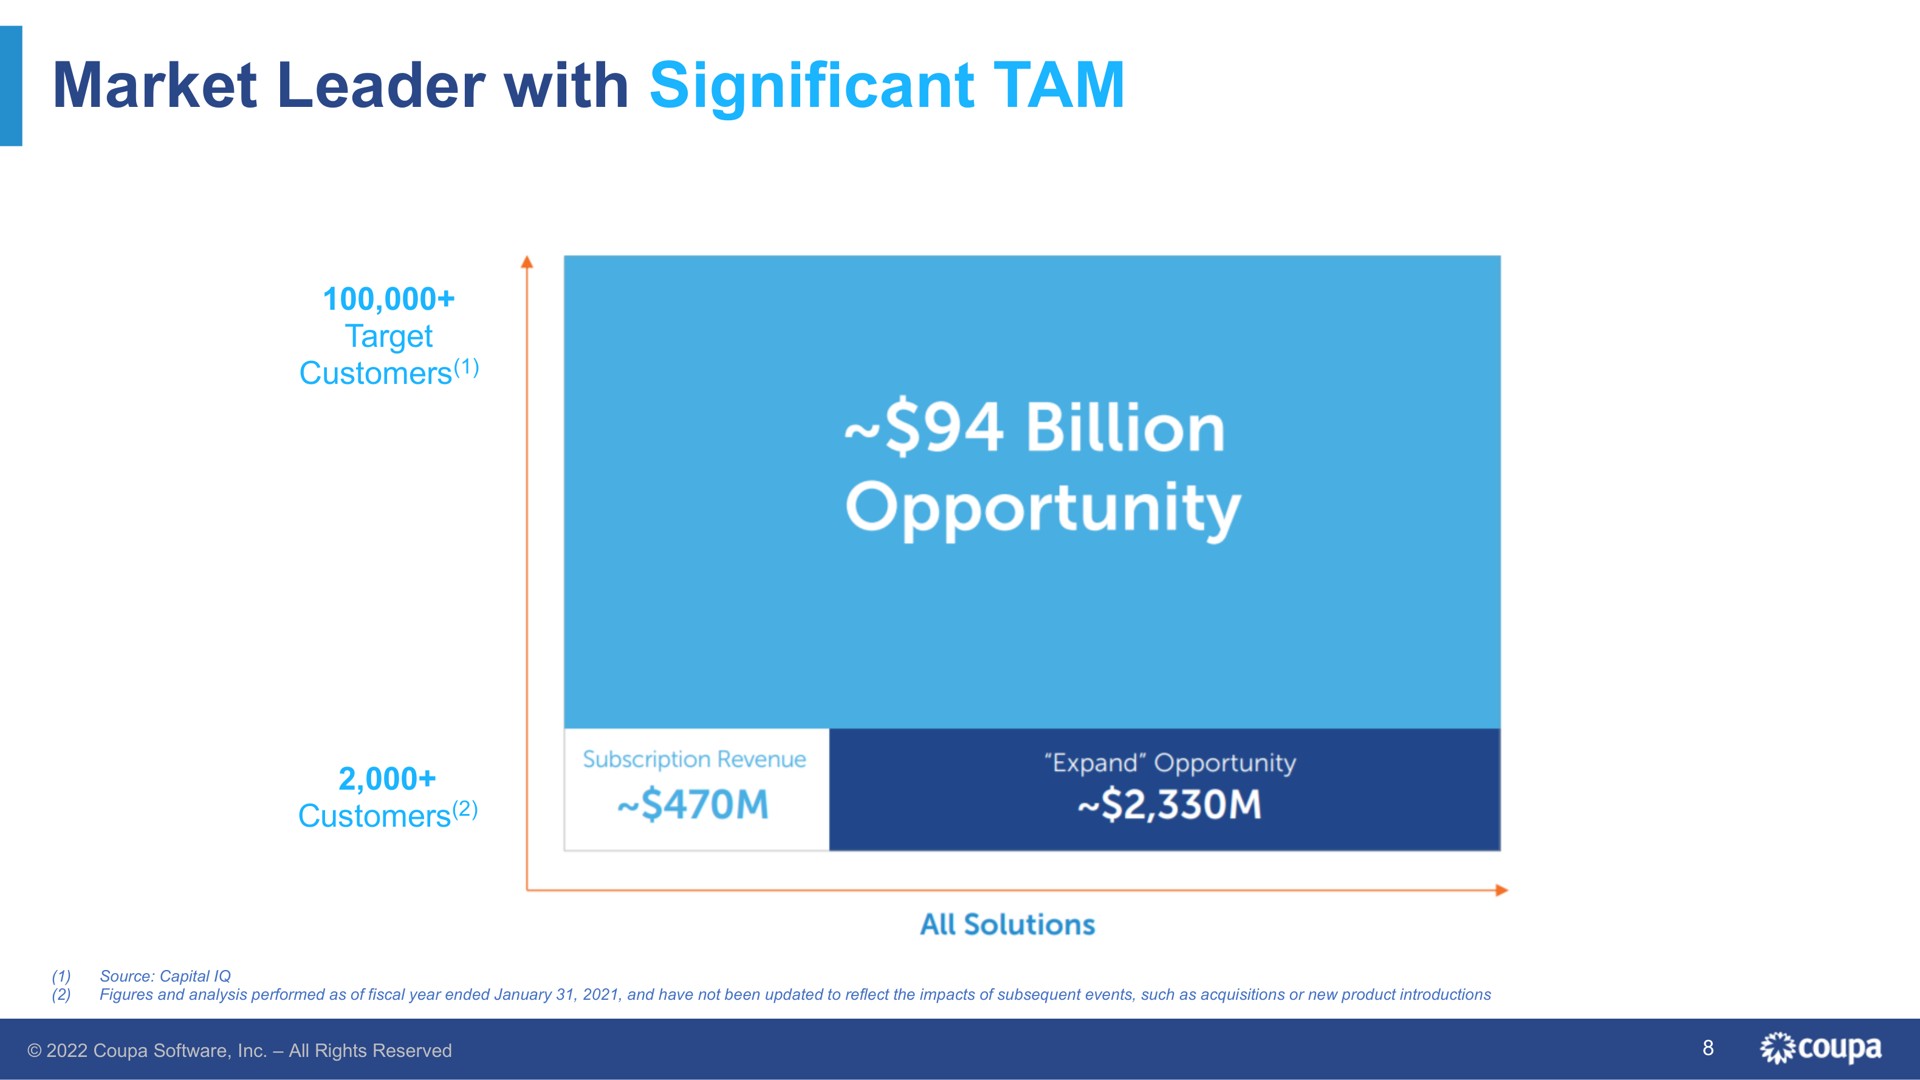 market leader with significant tam billion opportunity | Coupa